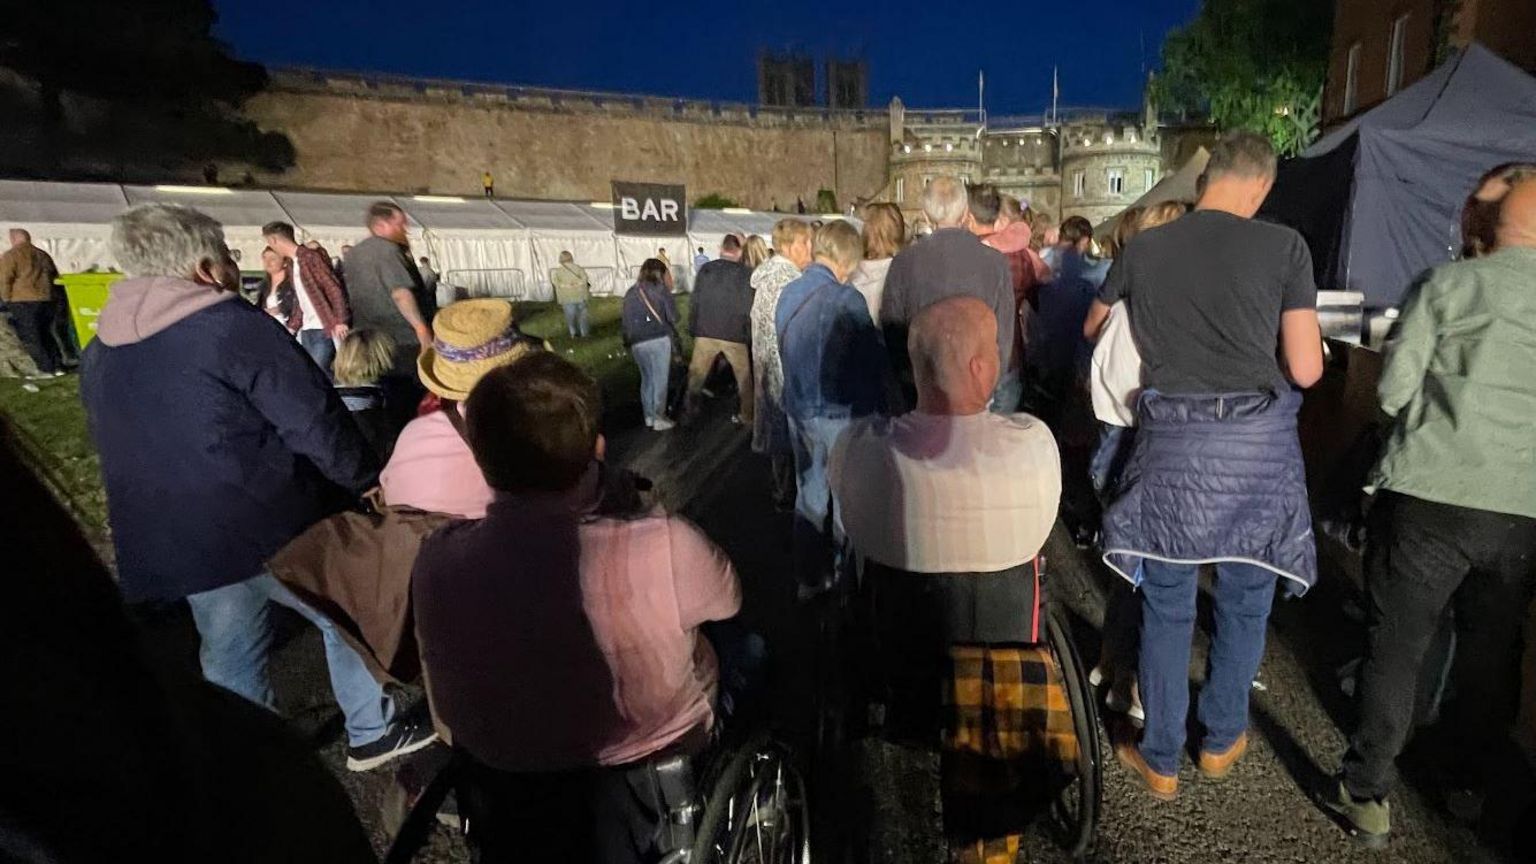 People in wheelchairs leaving Lincoln Castle via East Gate after the concert